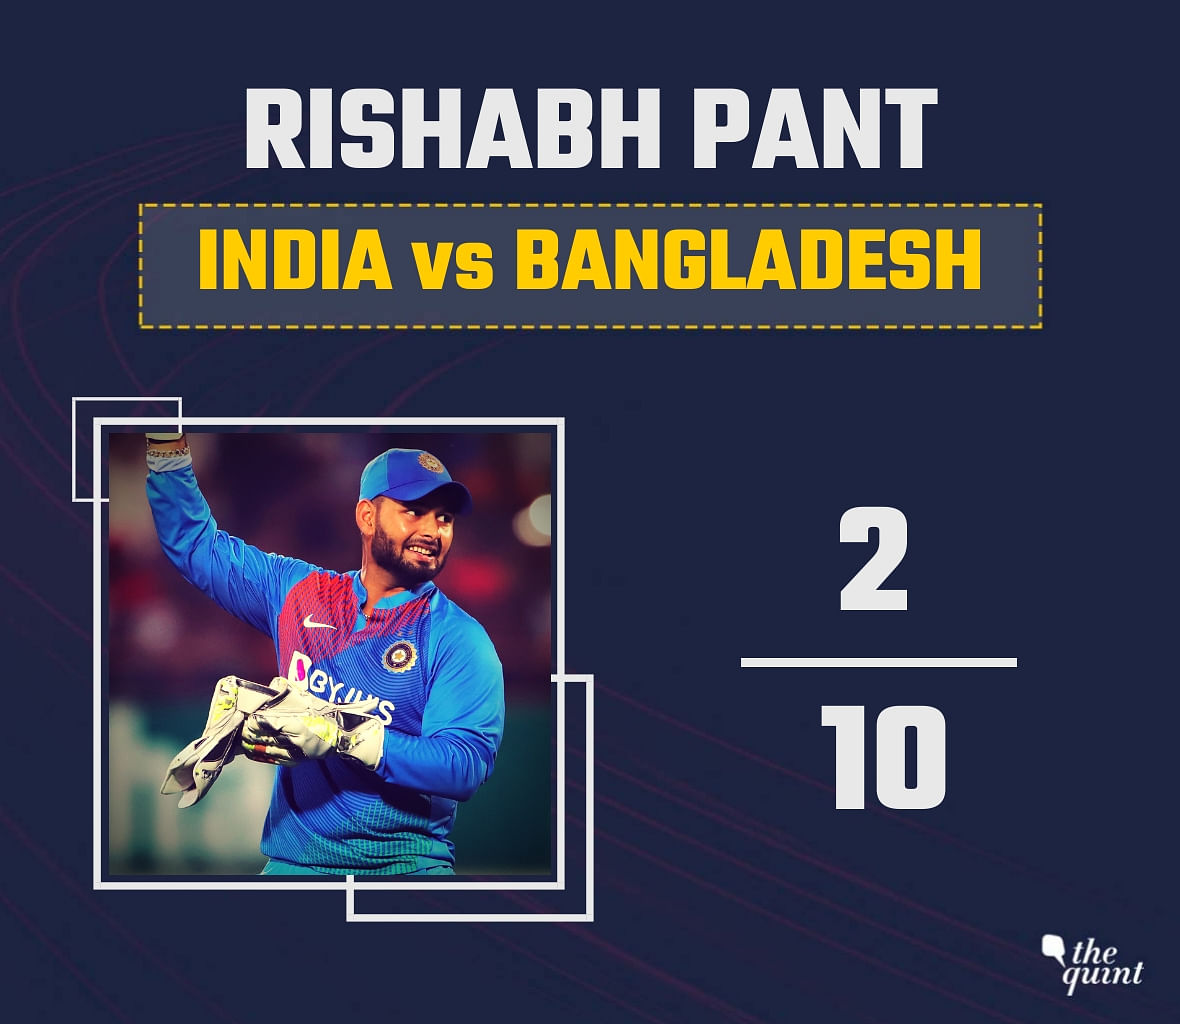 Here’s a look at the hits and misses from Team India’s three-match T20 international series against Bangladesh.